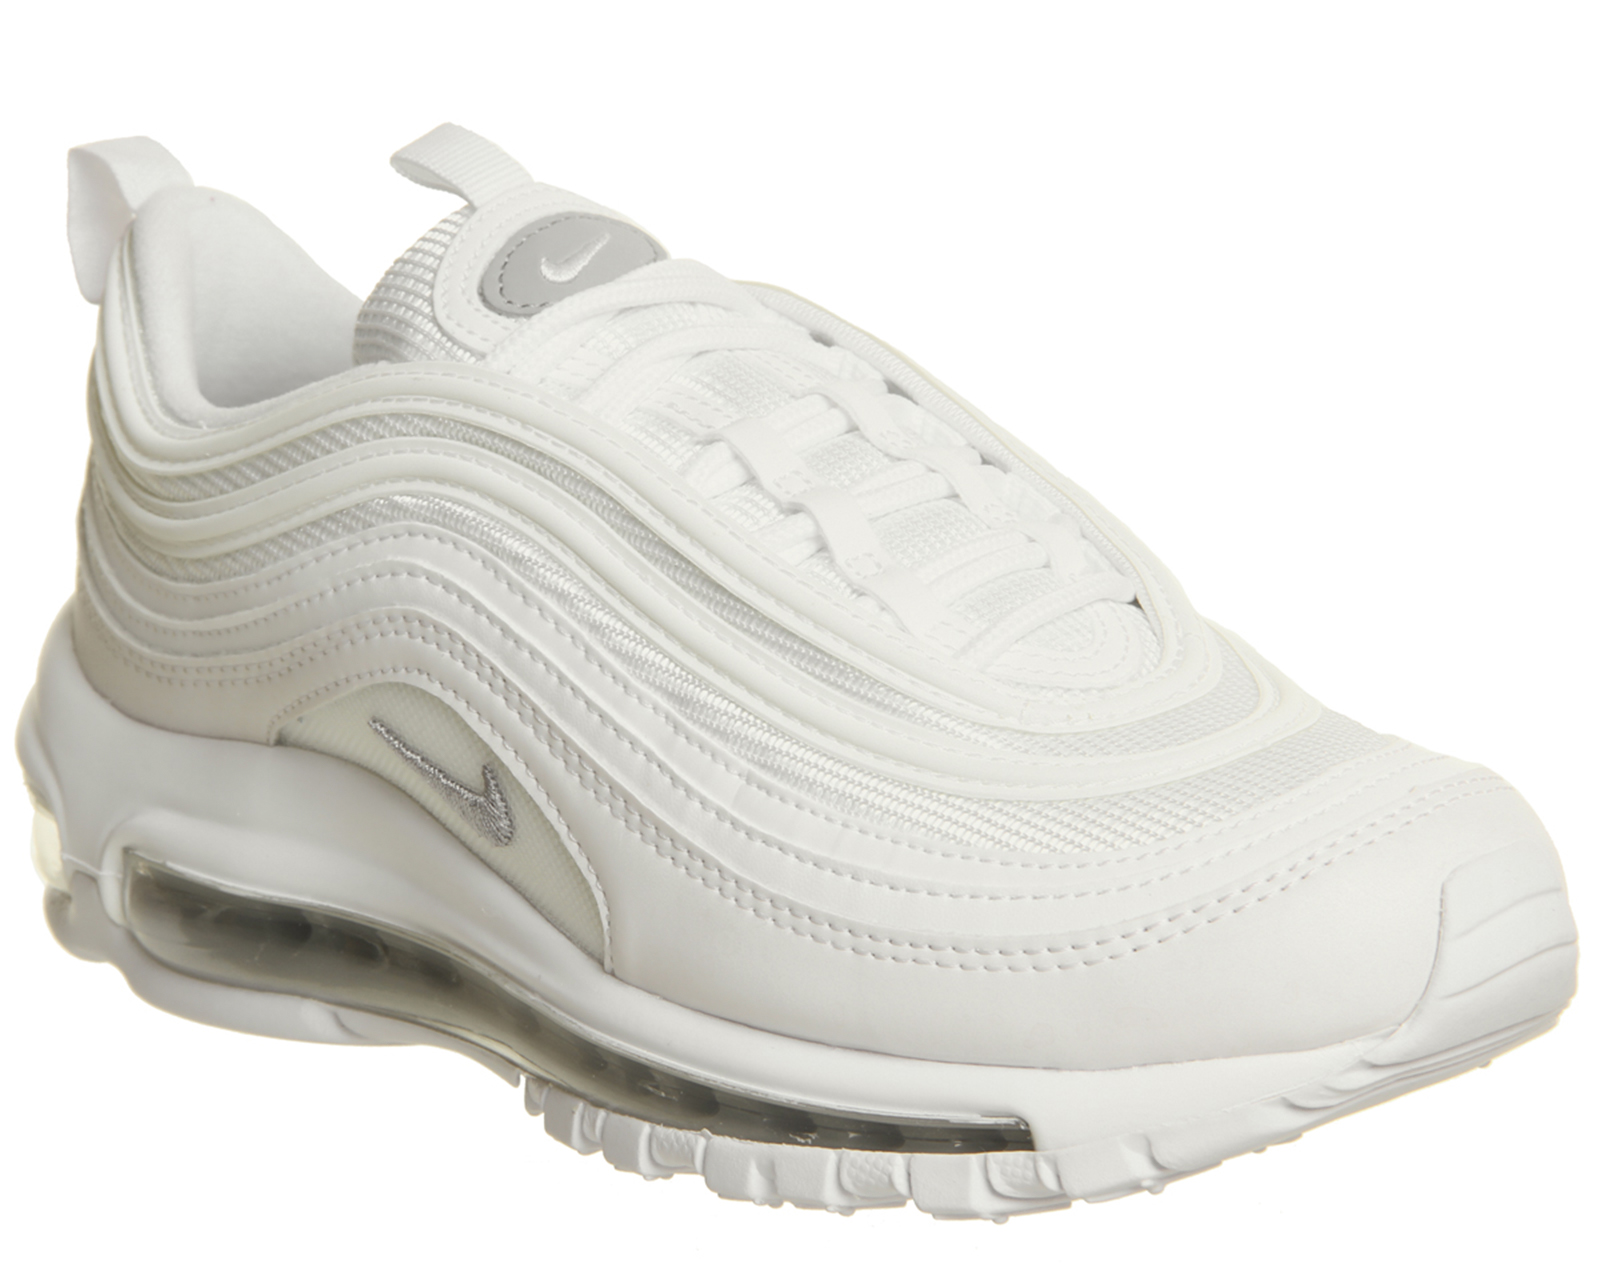 Nike Air Max 97 Gs White Wolf Grey - Hers trainers